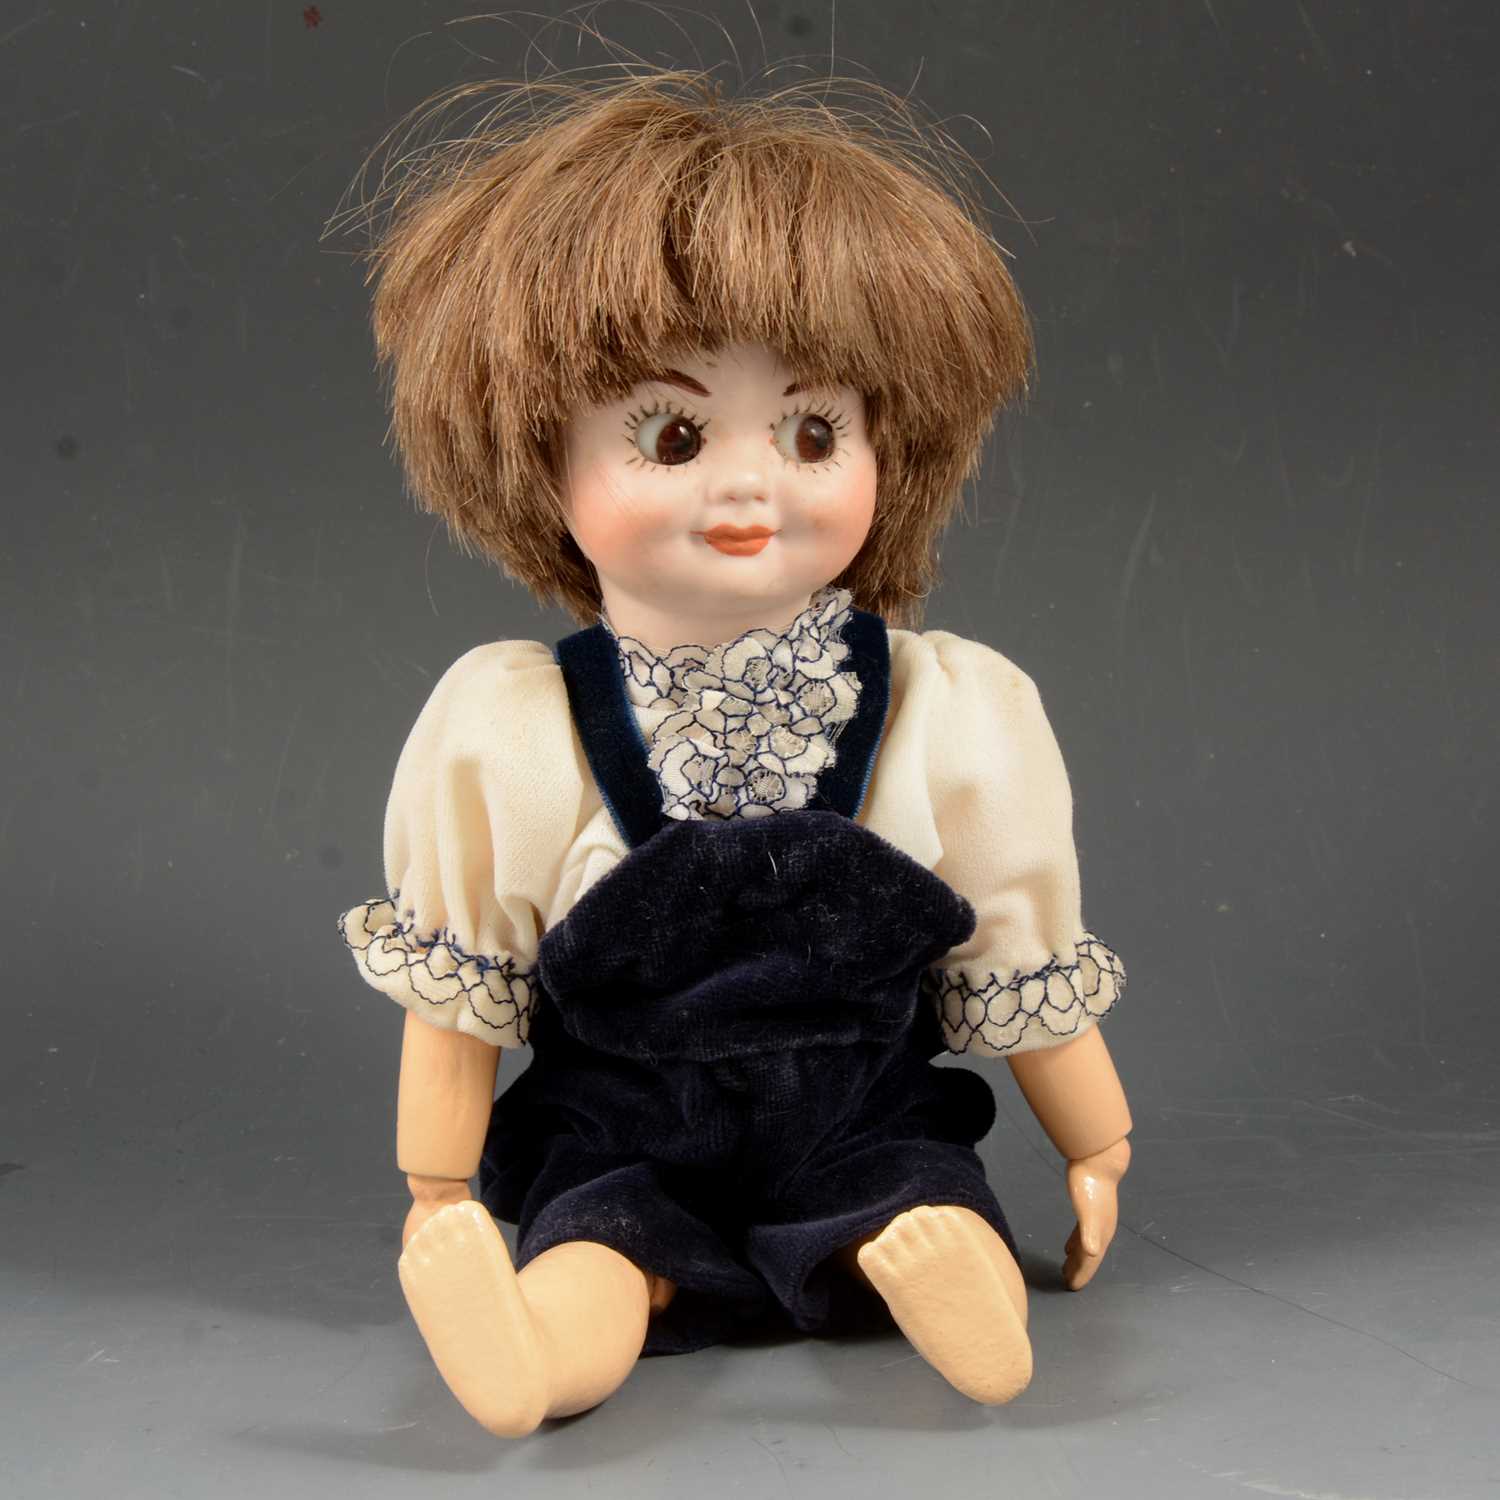 Lot 3 - Armand Marseille bisque head googly eyed doll, head stamp 323